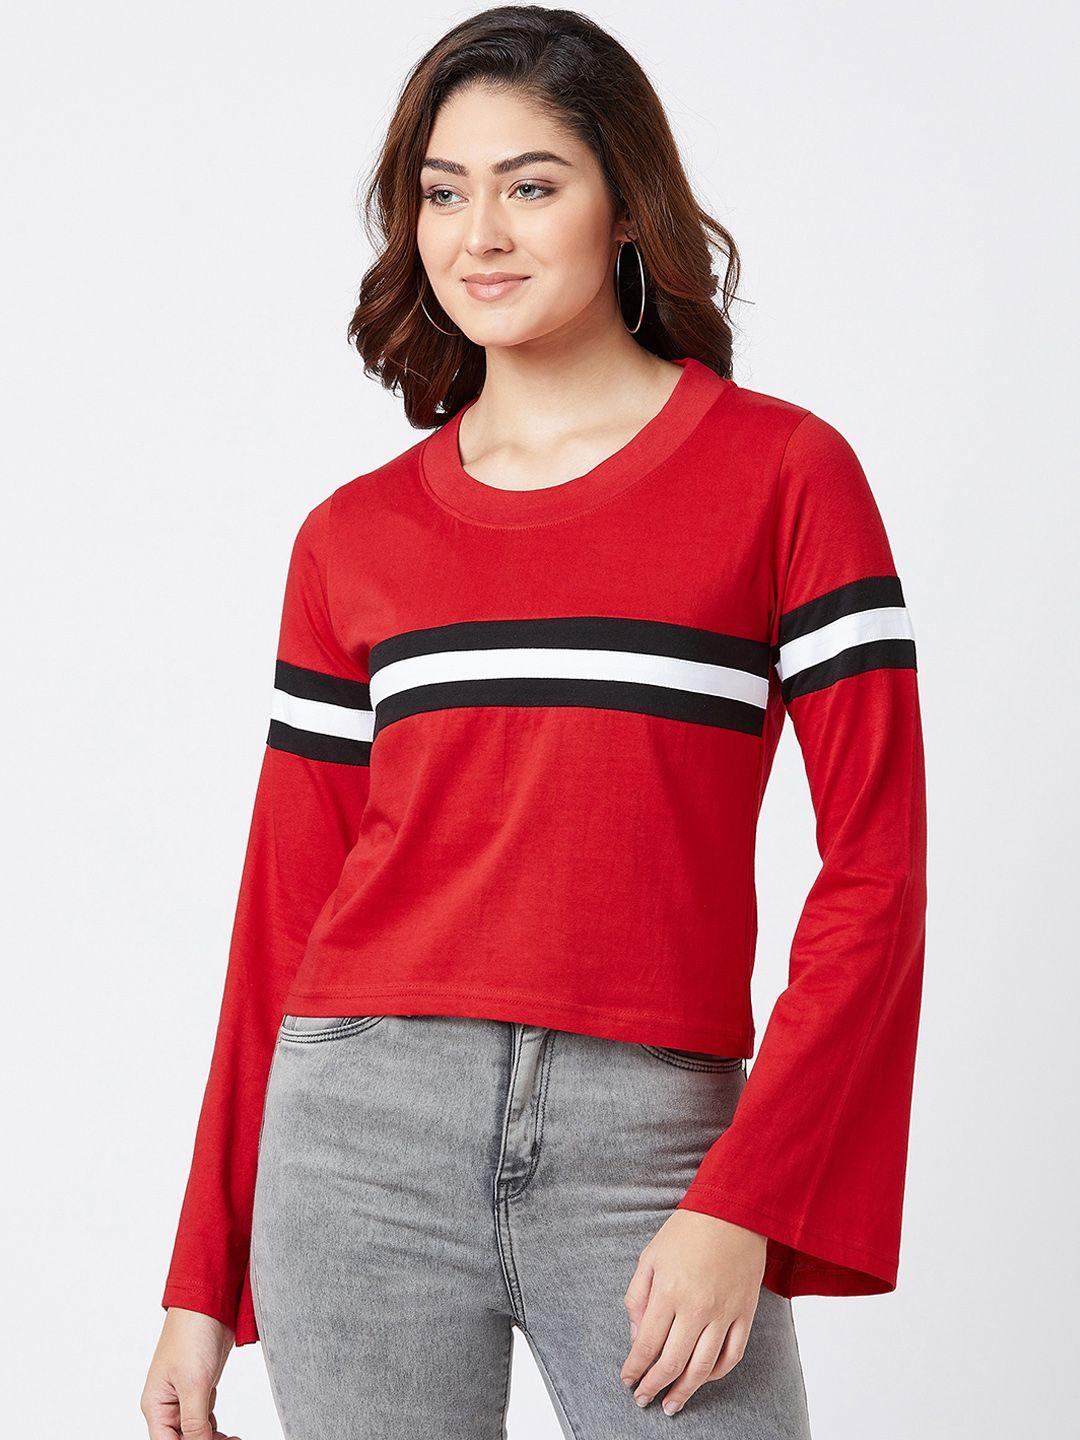 the dry state women red & white striped pure cotton top